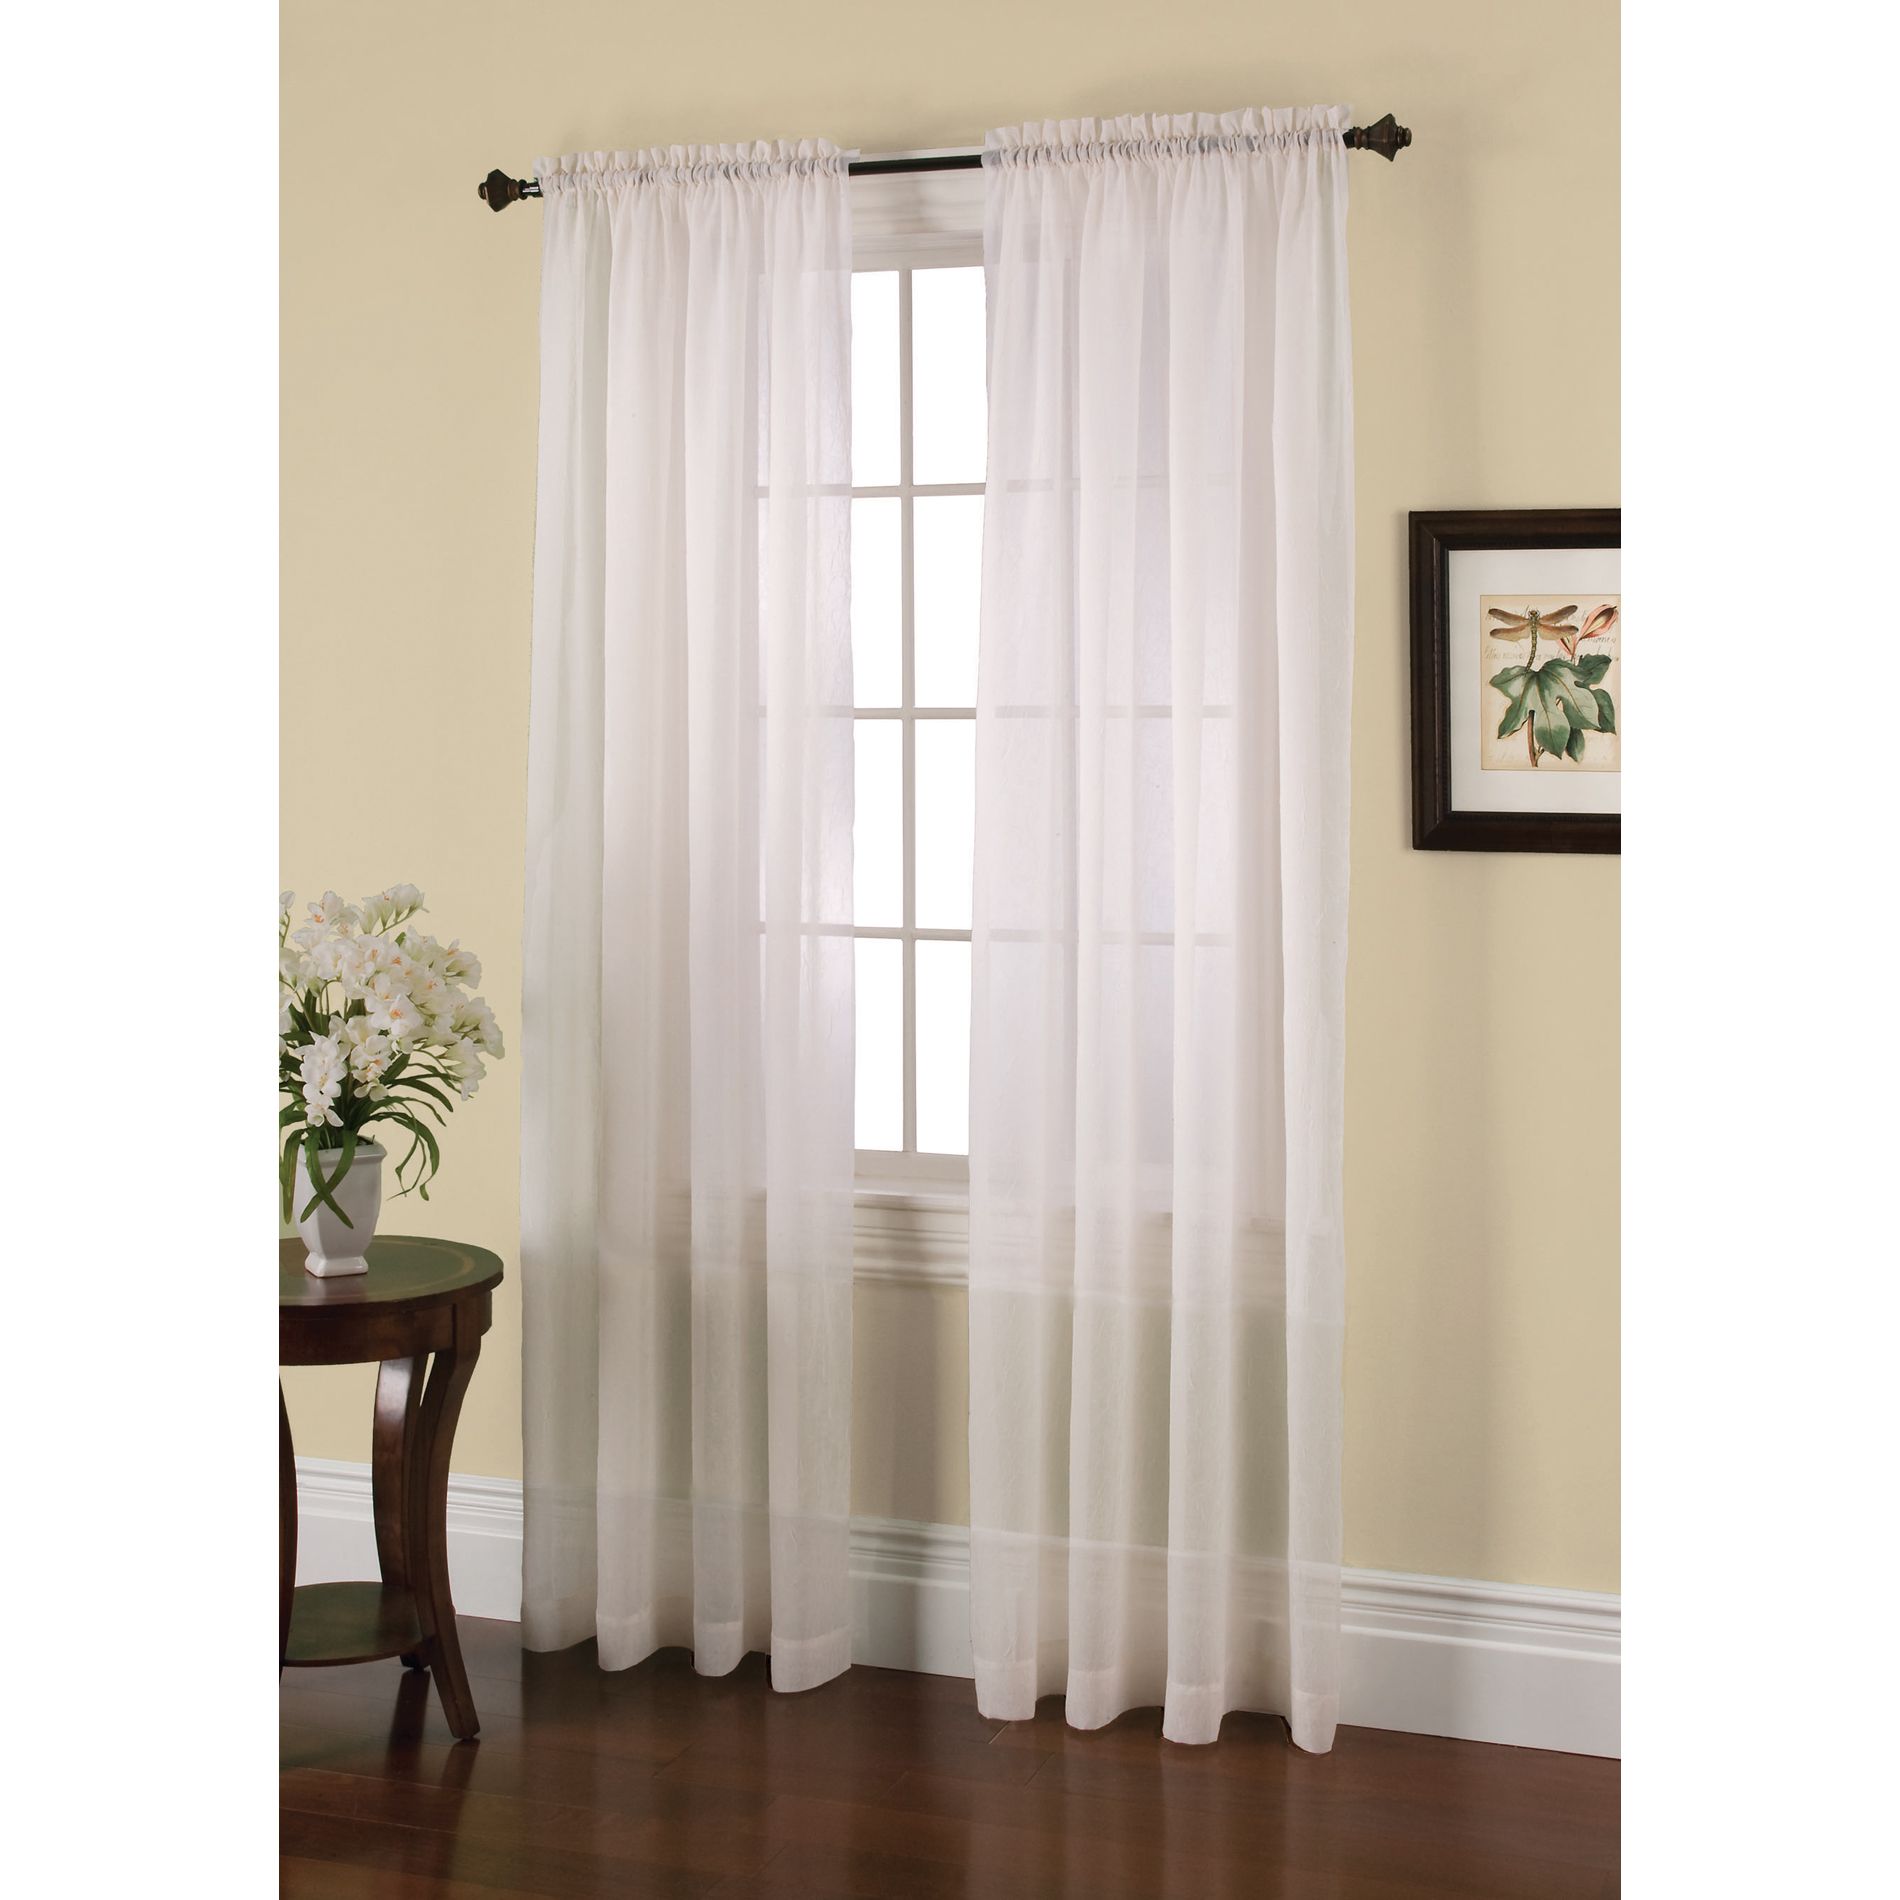 window panels jaclyn smith crushed voile curtain white: get classic at sears u0026 kmart WCYUEXH